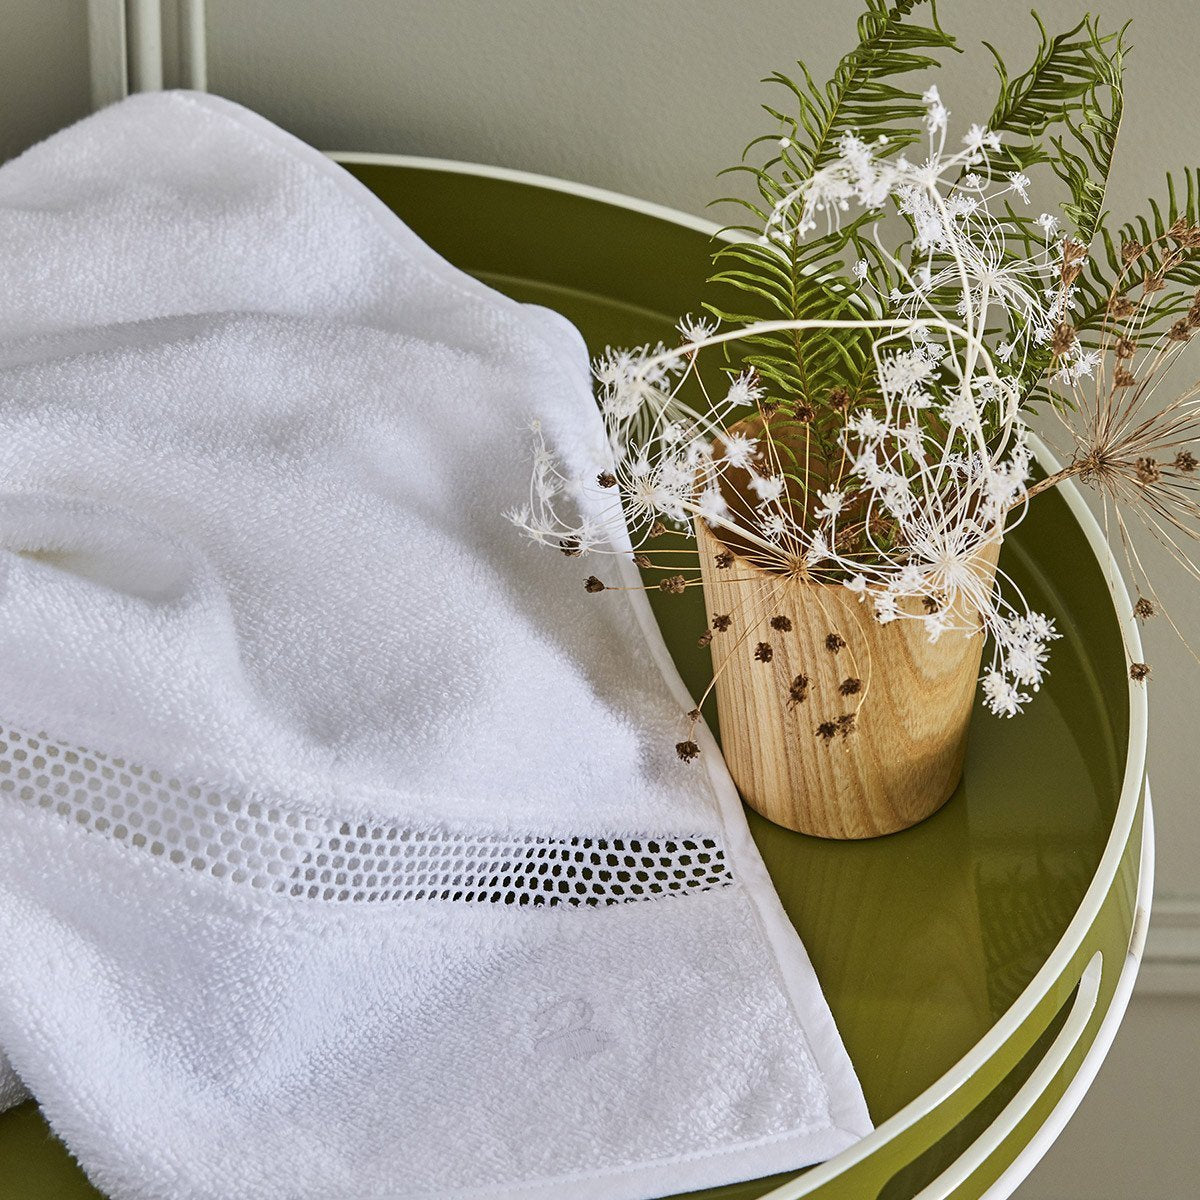 https://cdn.shopify.com/s/files/1/1268/4551/products/fig-linens-yves-delorme-oriane_1200_1200_serviette_ambiance_blanc.jpg?v=1600198609